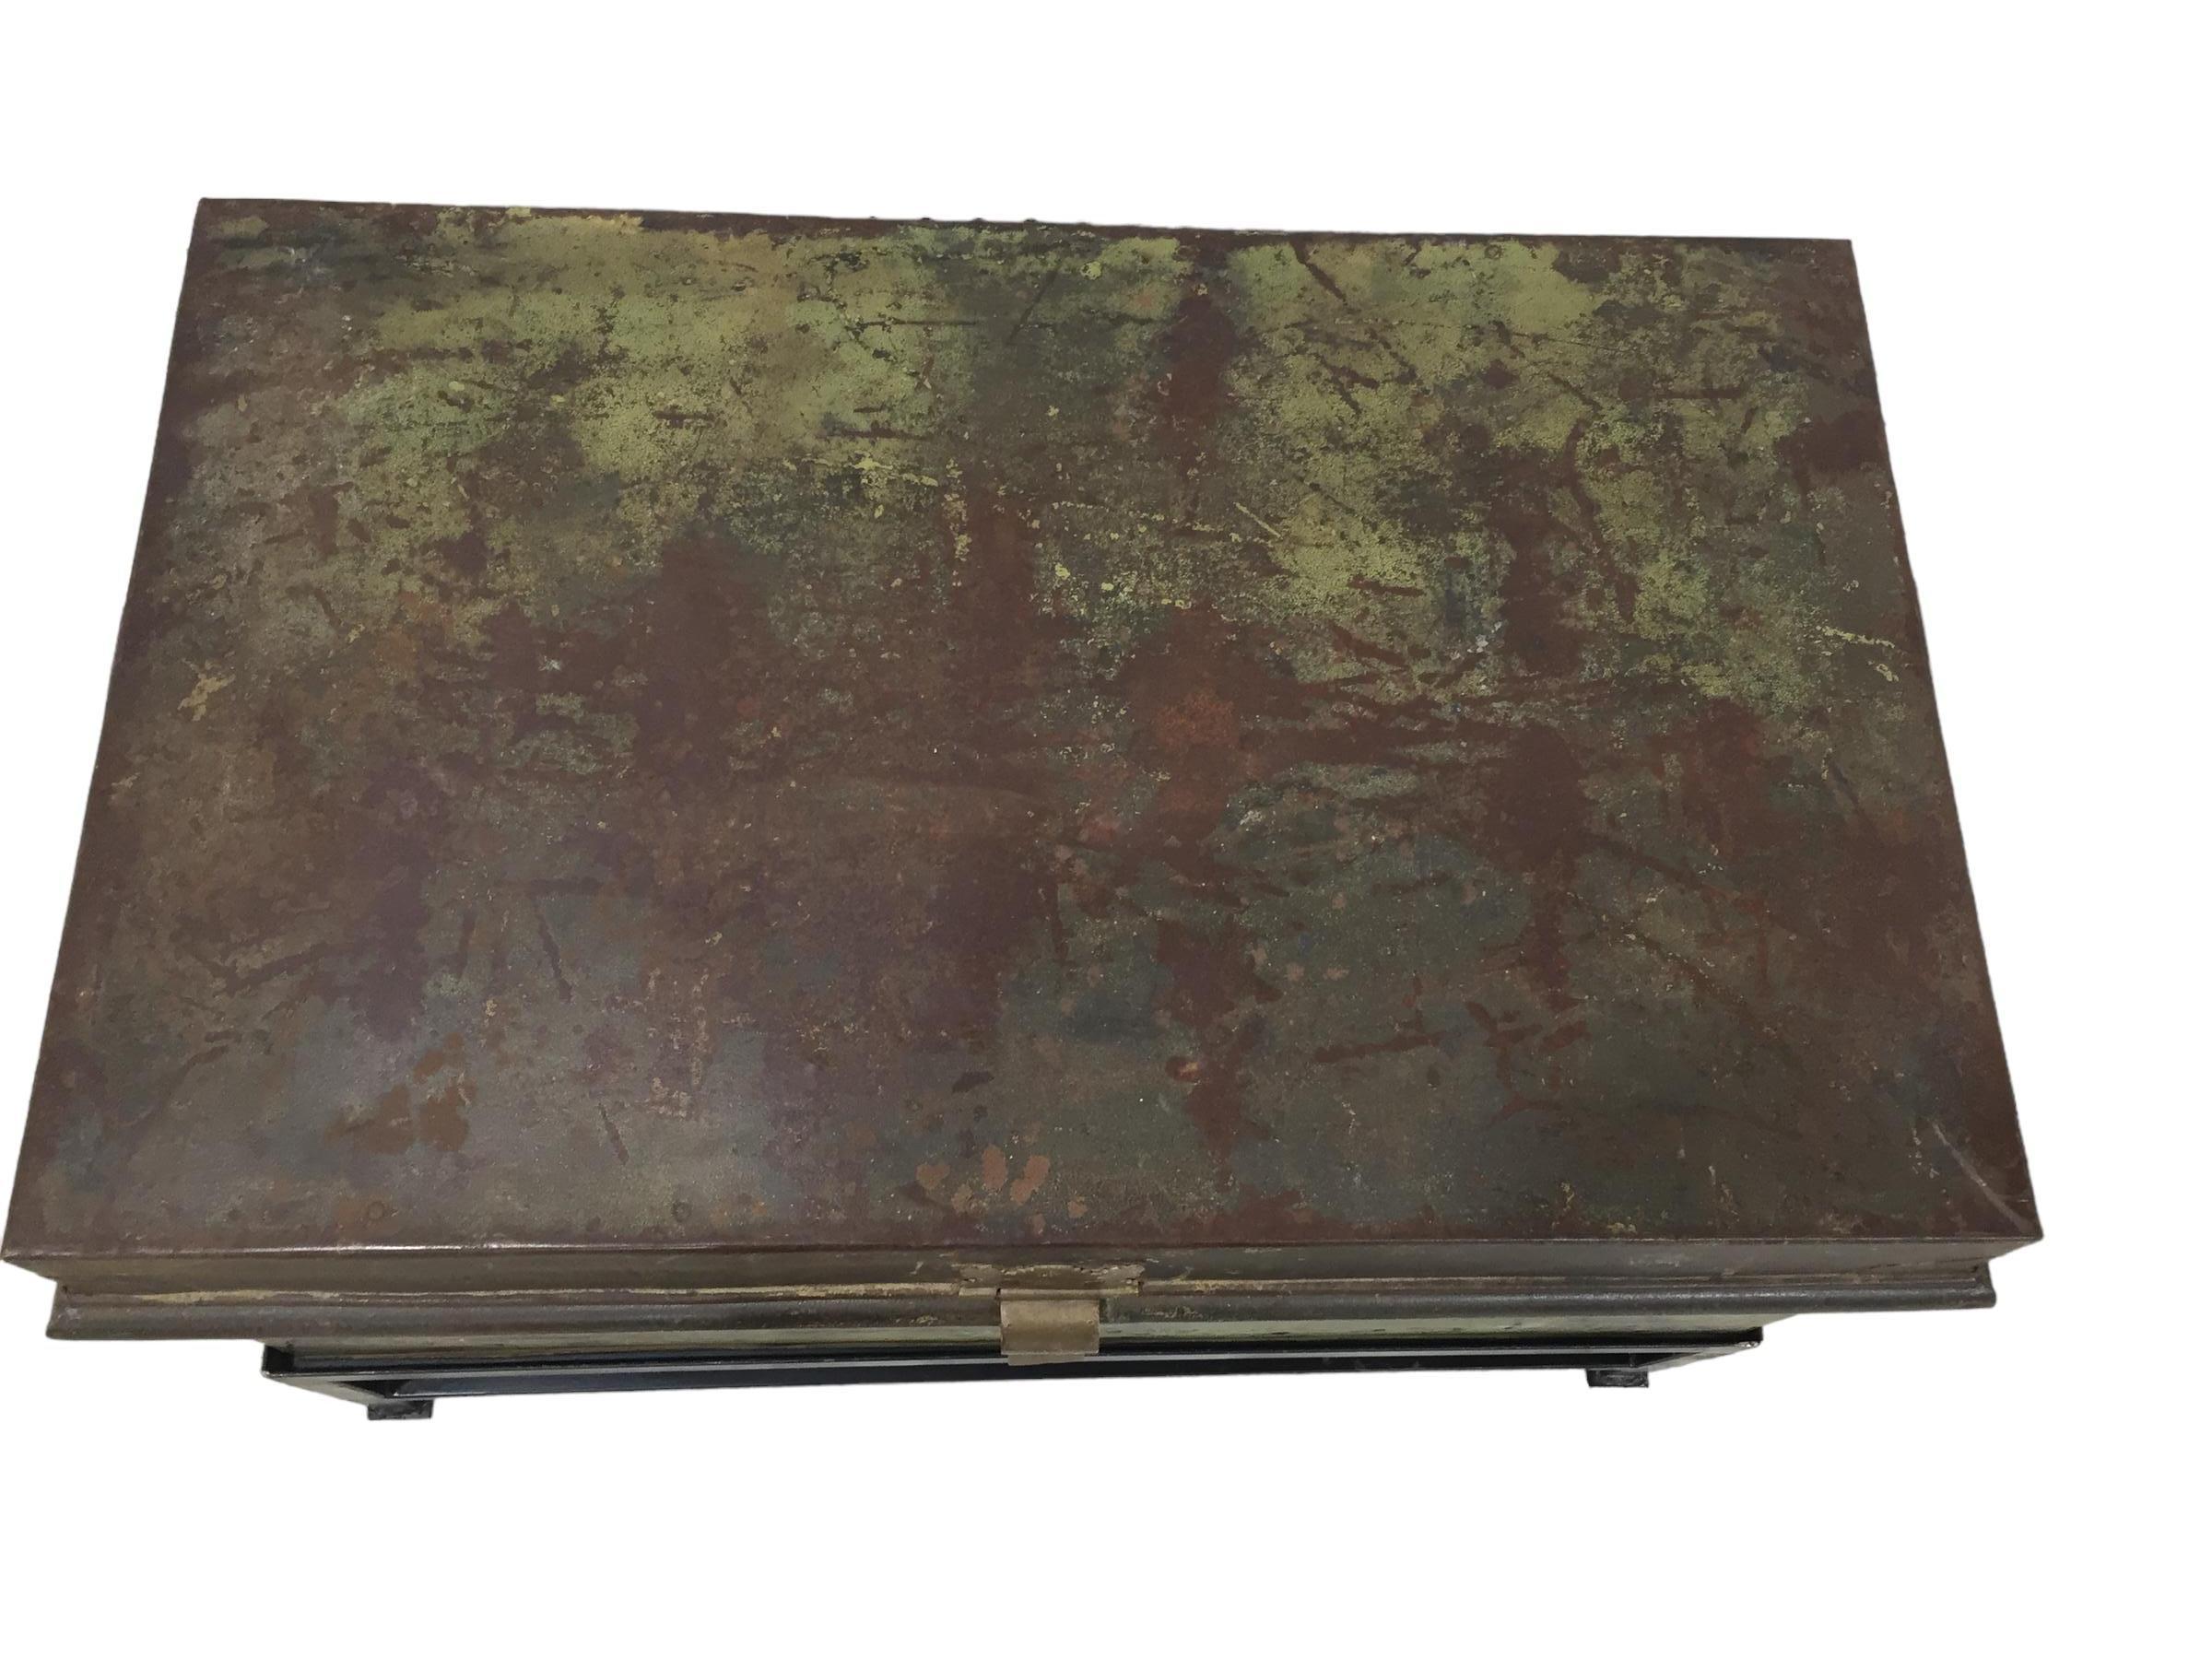 Antique English military metal trunk with brass latch on custom iron base. Trunk shows evidence of daily, loss of paint, adds to the overall authenticity of the trunk.
